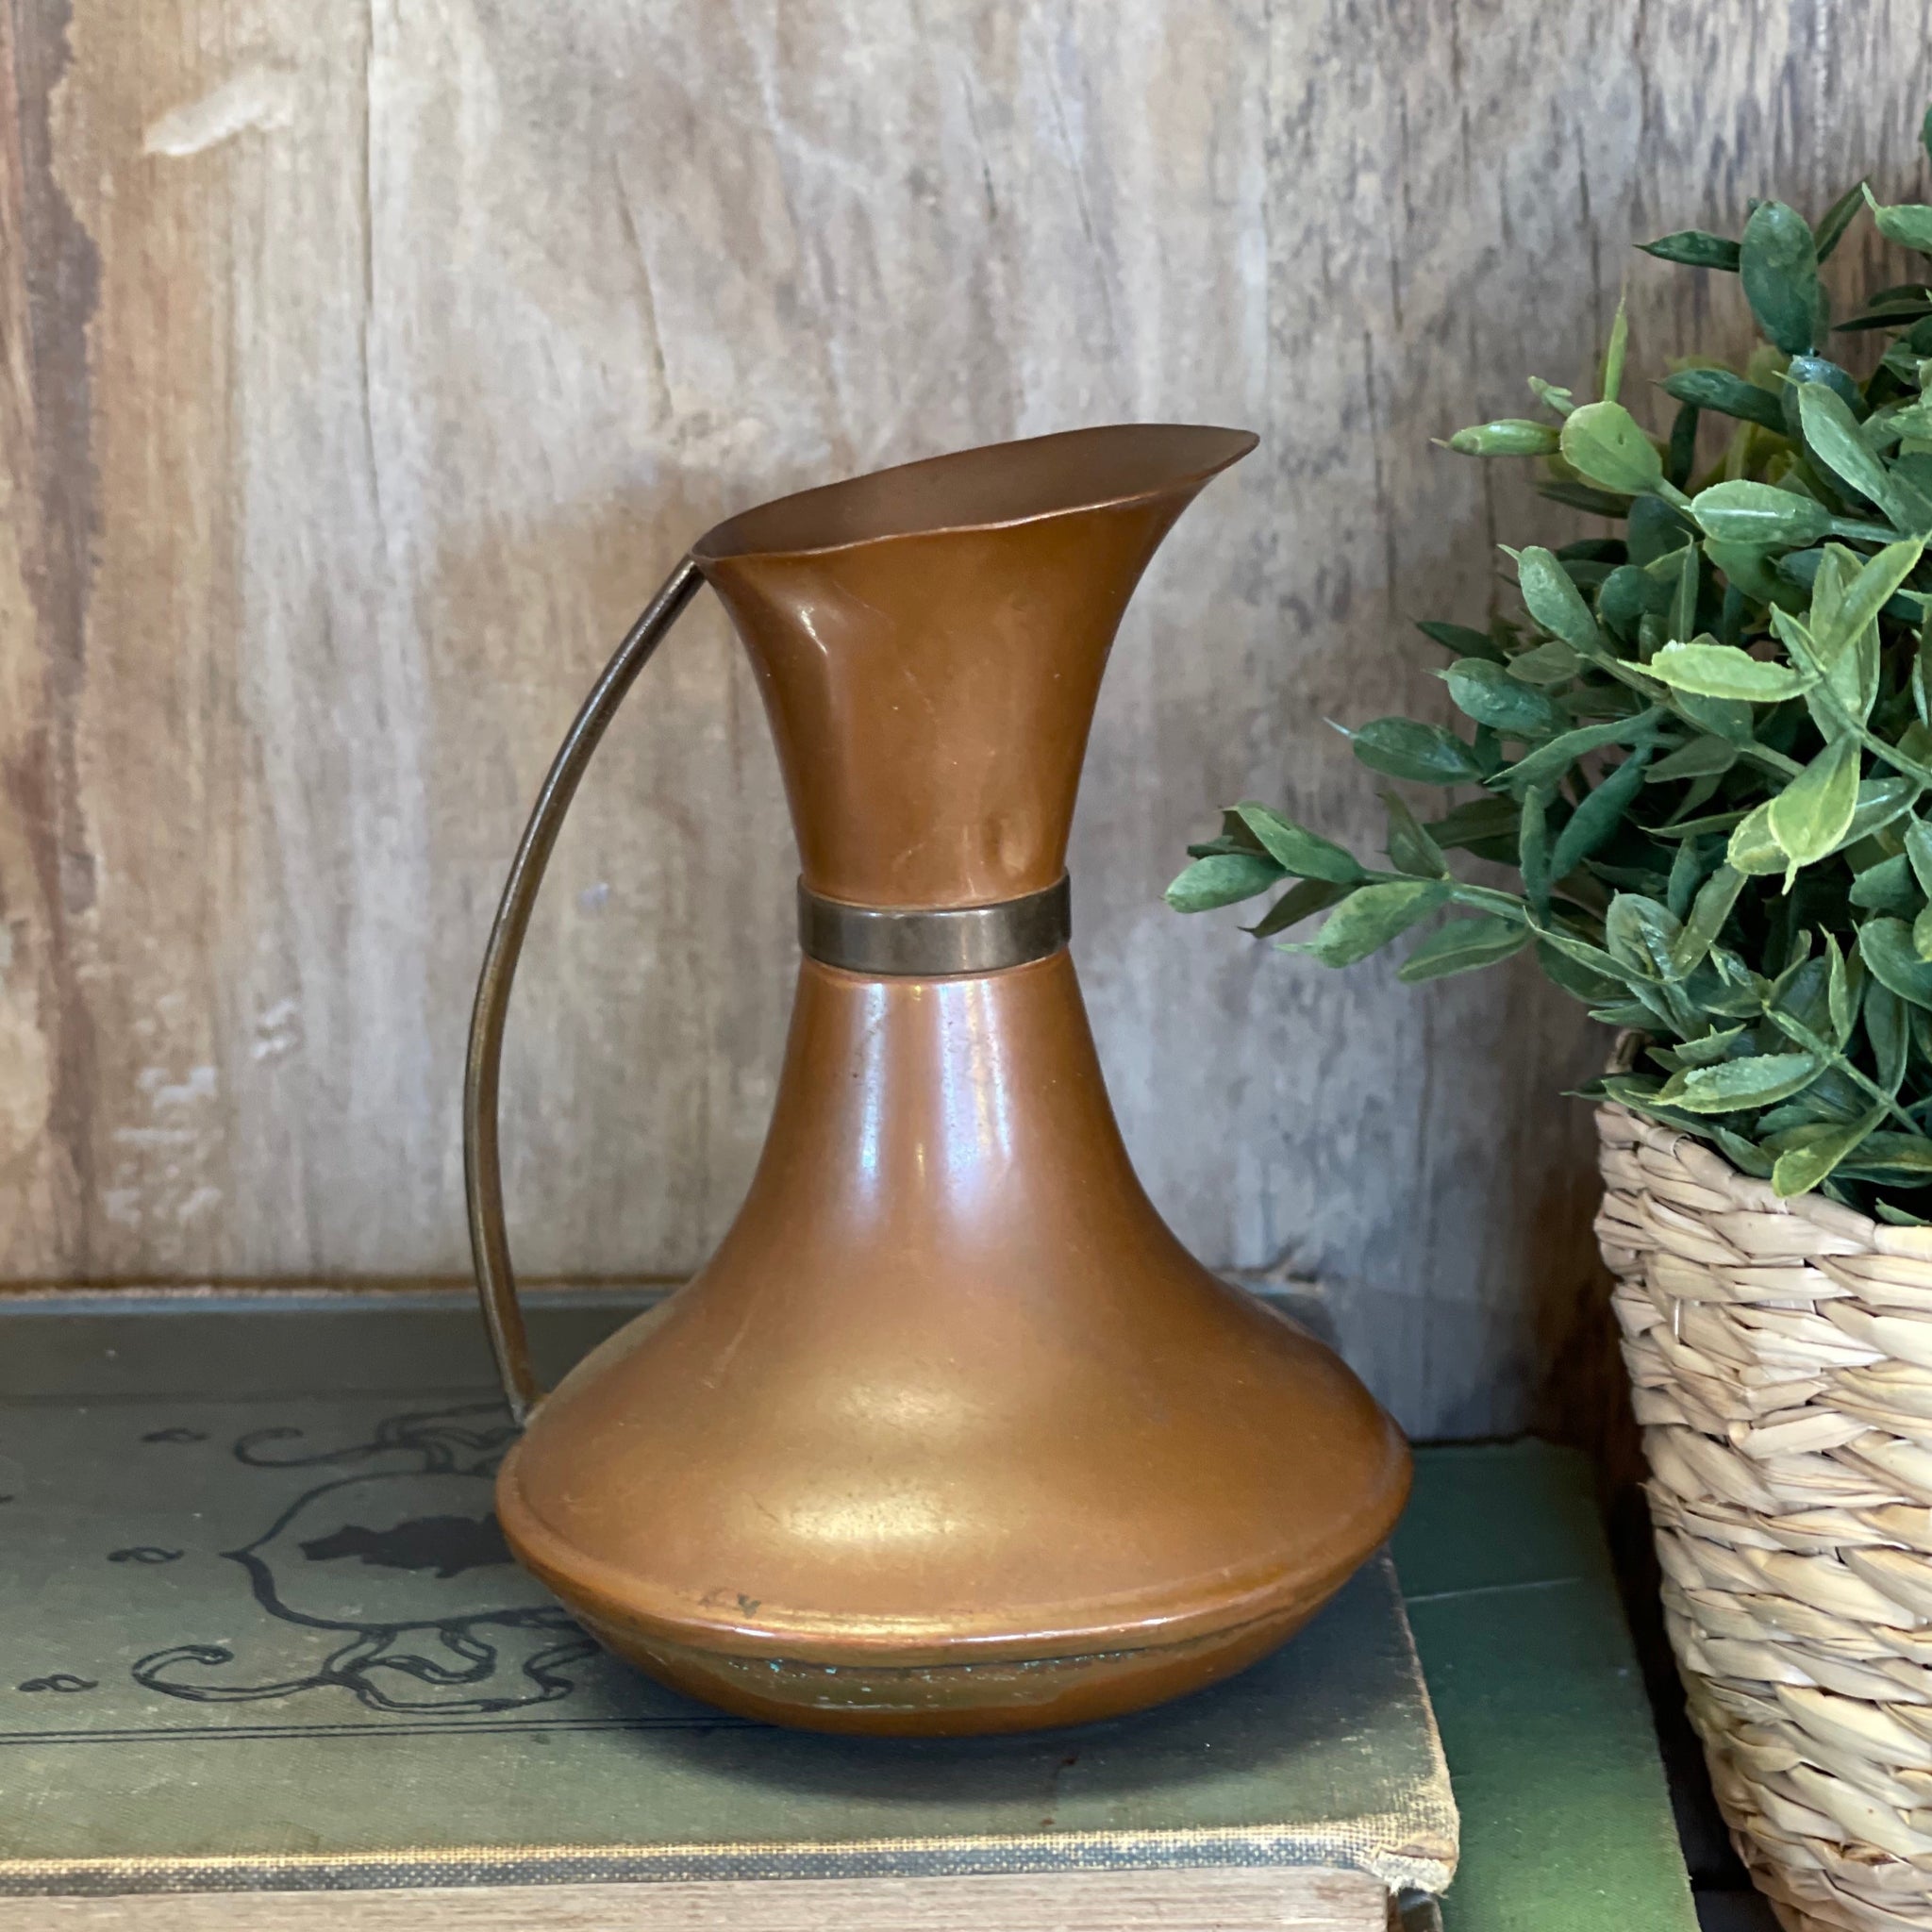 Small Copper and Brass Pitcher – The Gentleman's Stache, DBA Mercantile 1858